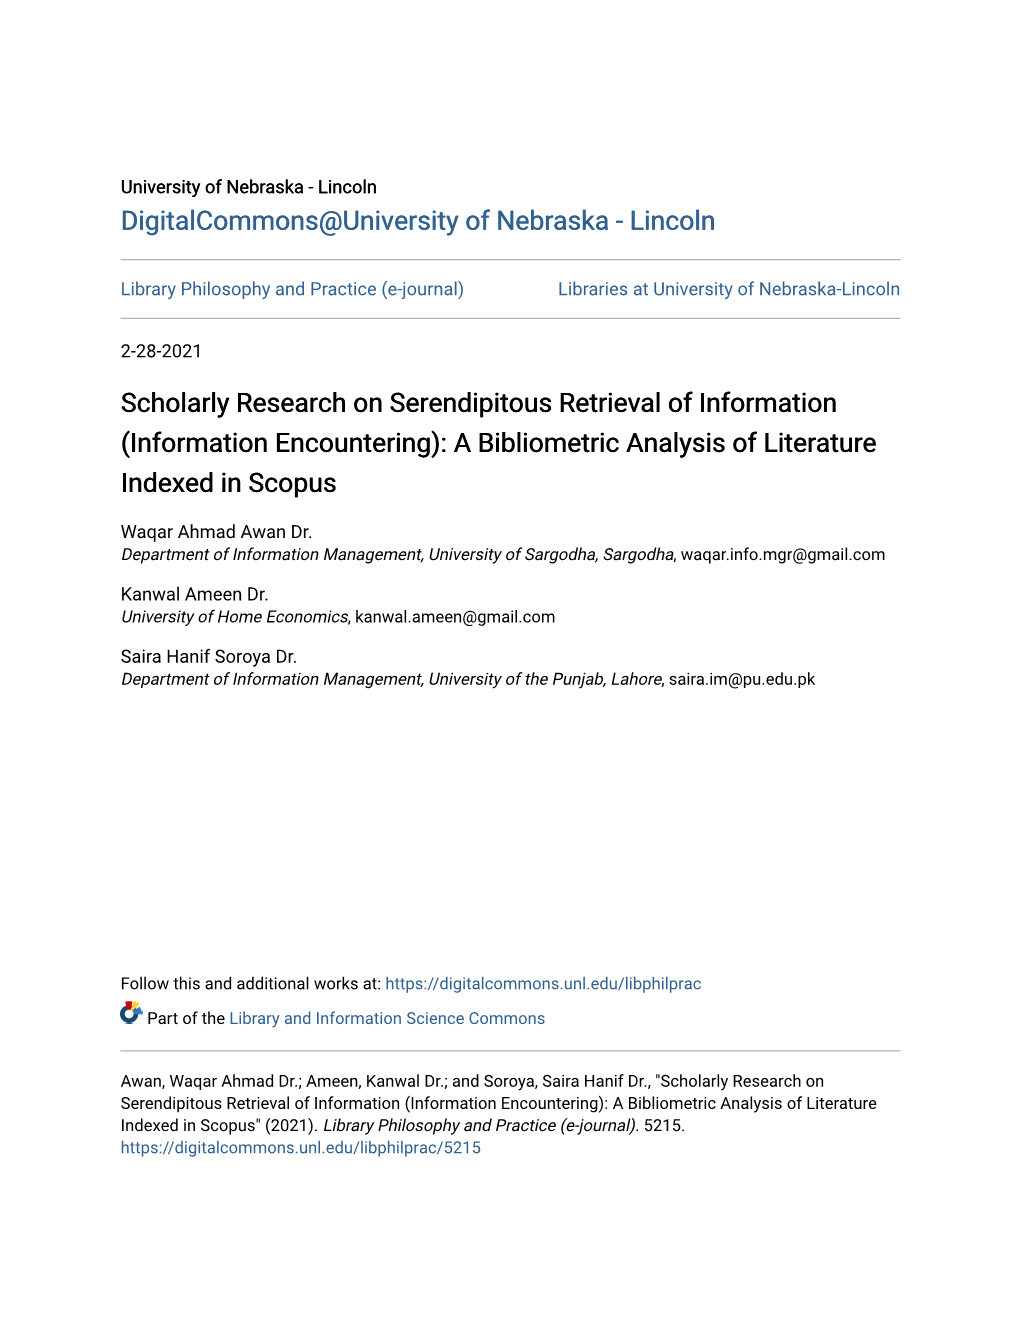 Scholarly Research on Serendipitous Retrieval of Information (Information Encountering): a Bibliometric Analysis of Literature Indexed in Scopus